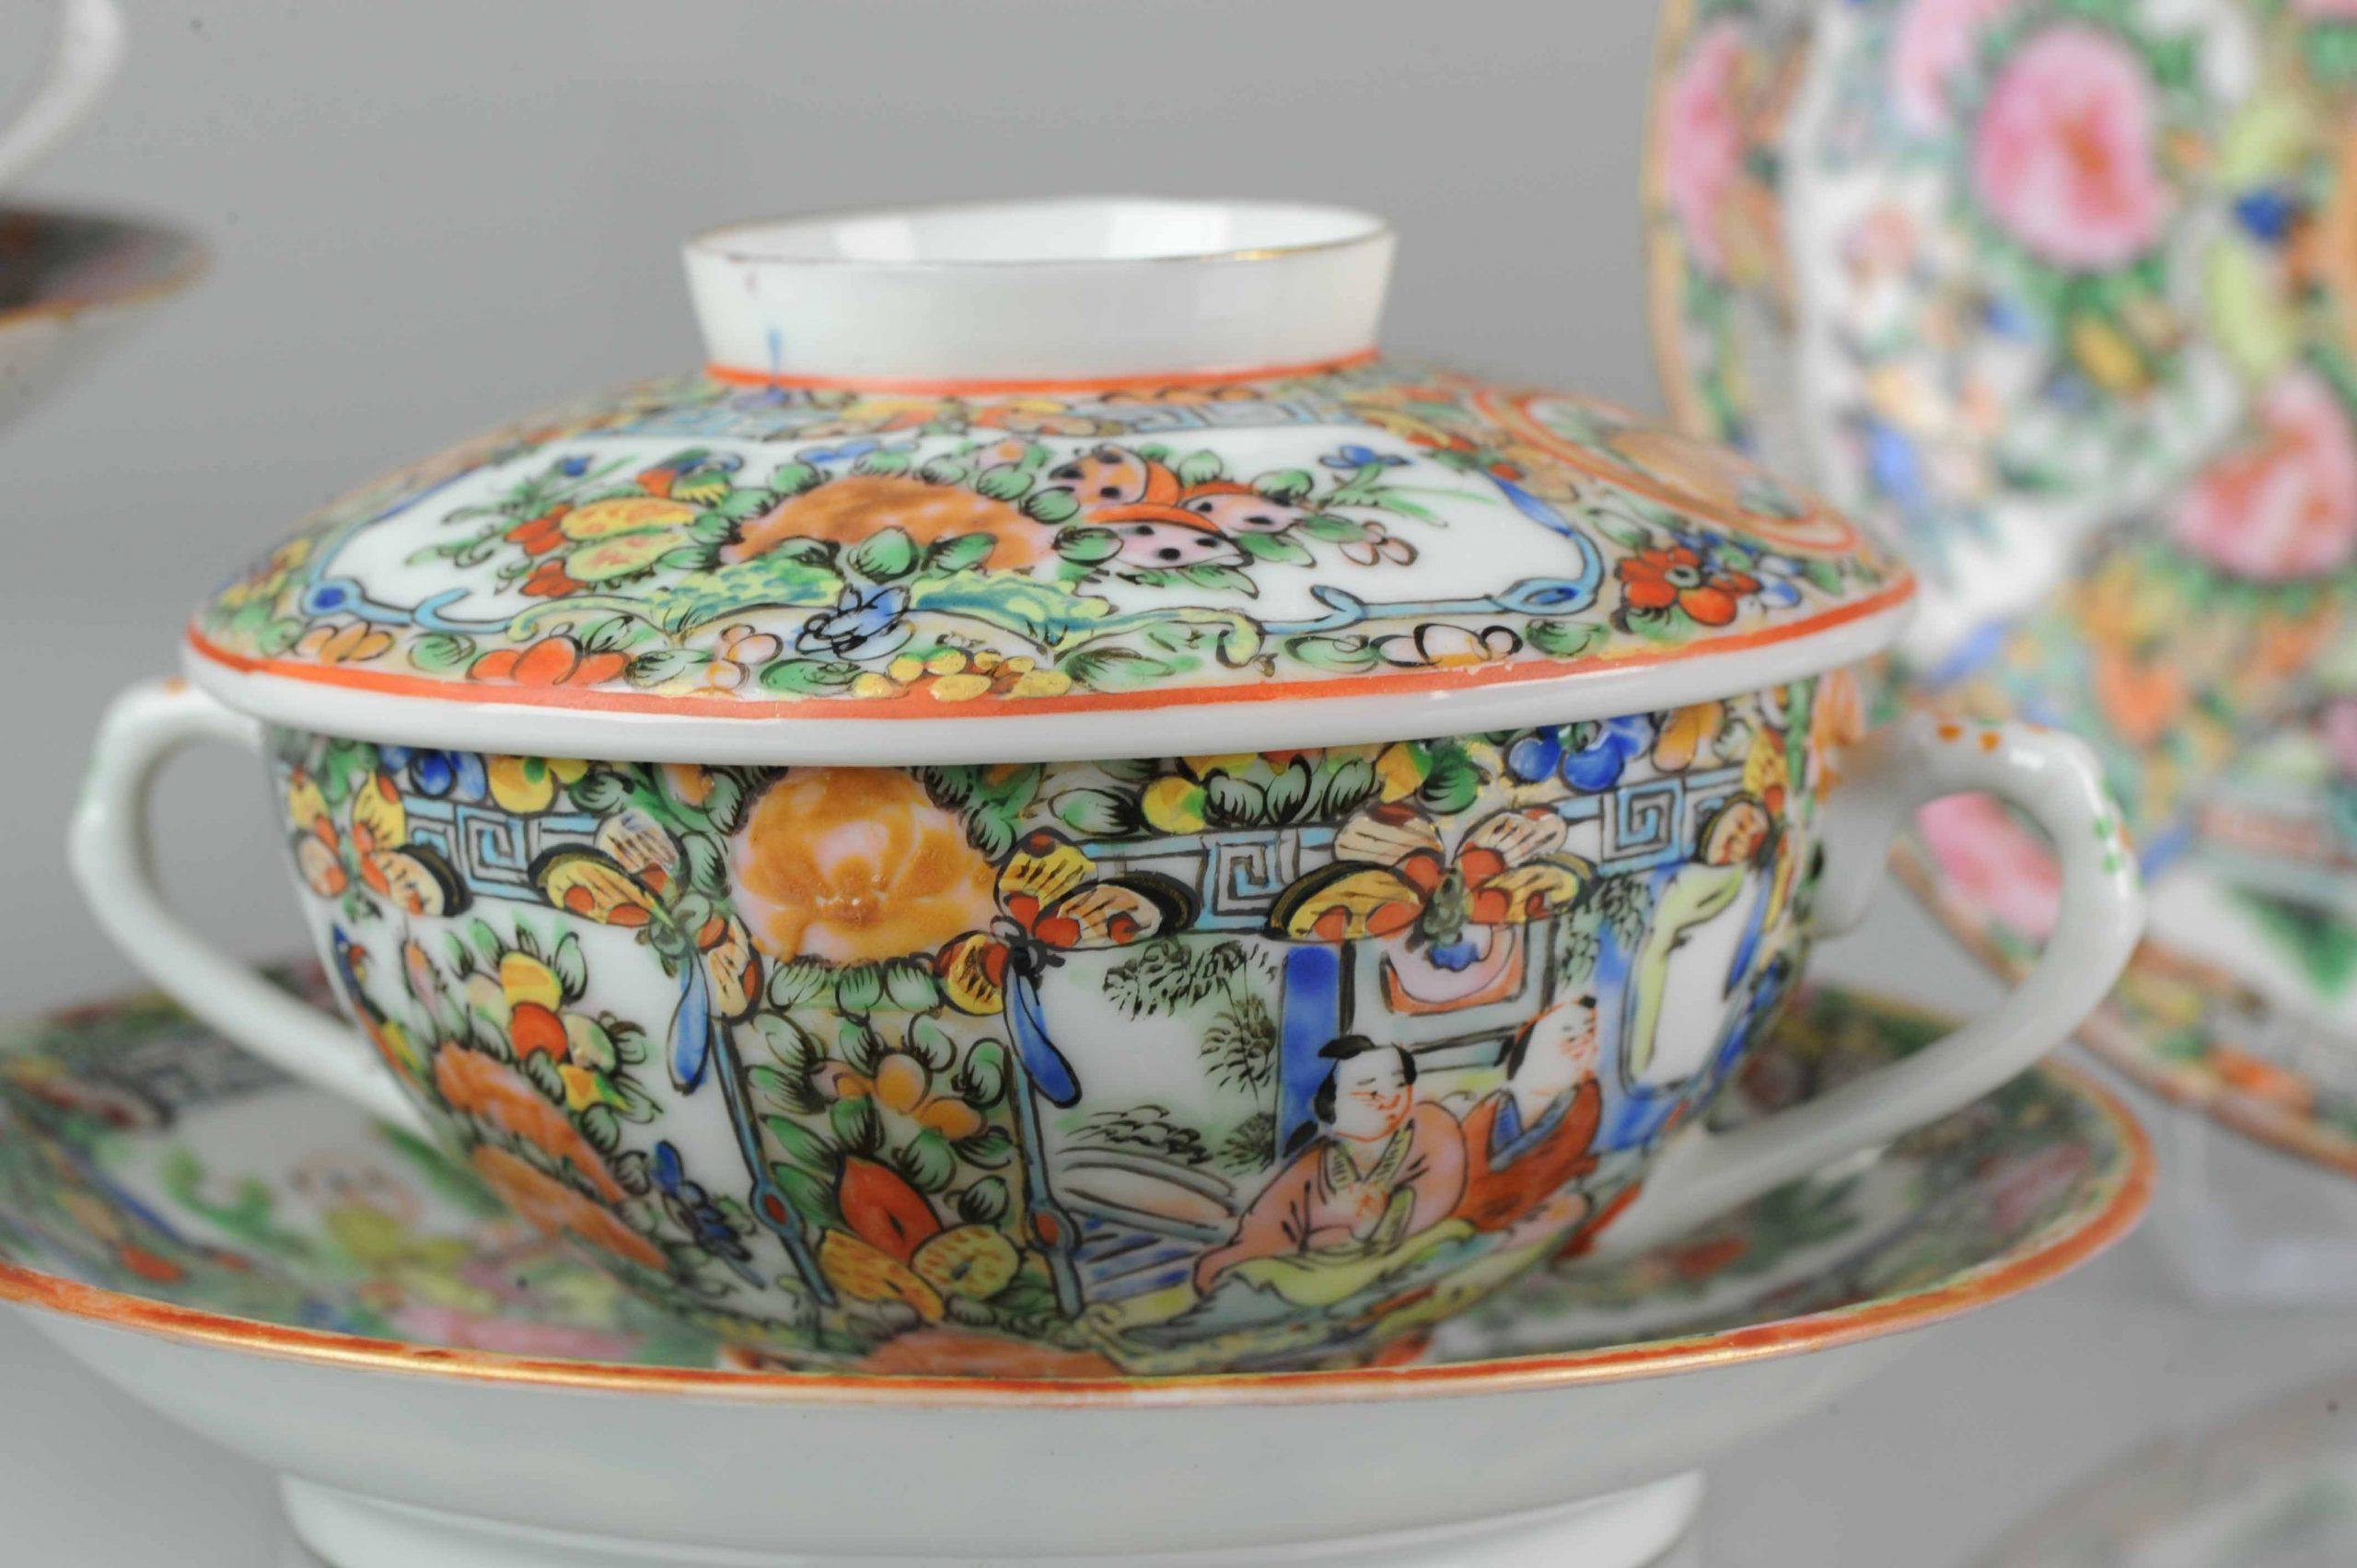 Antique Chinese Canton Lidded Tea Bowl, Flower, Porcelain, Minguo In Good Condition For Sale In Amsterdam, Noord Holland